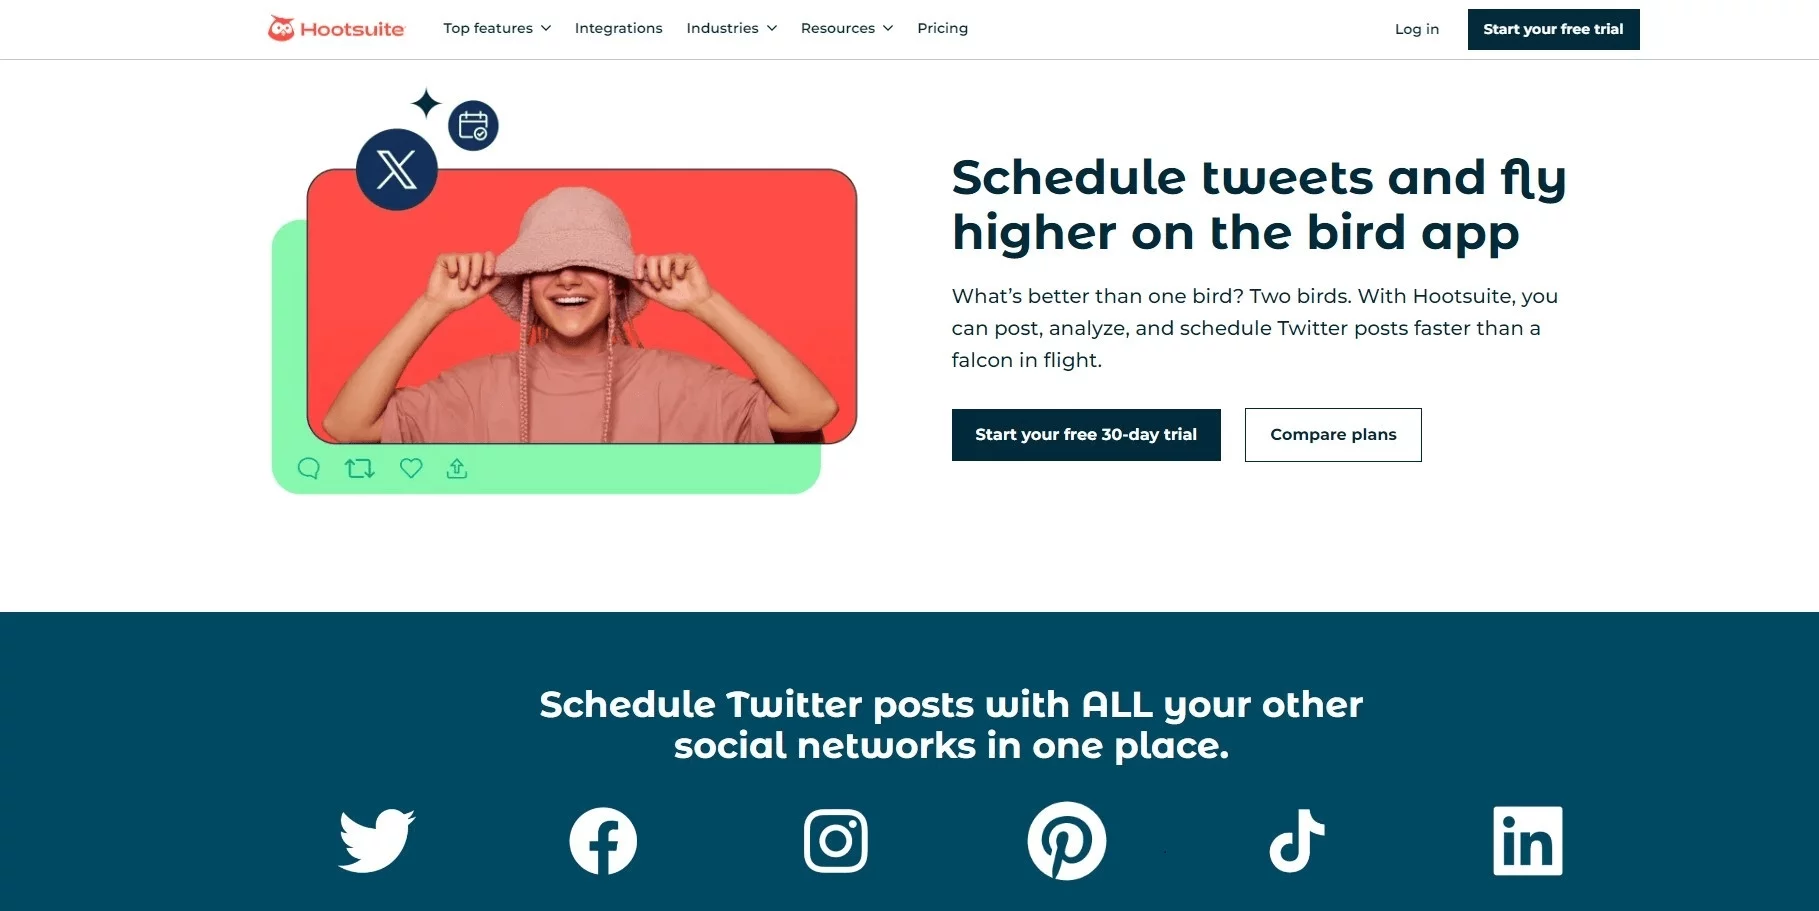 Hootsuite landing page for scheduling tweets